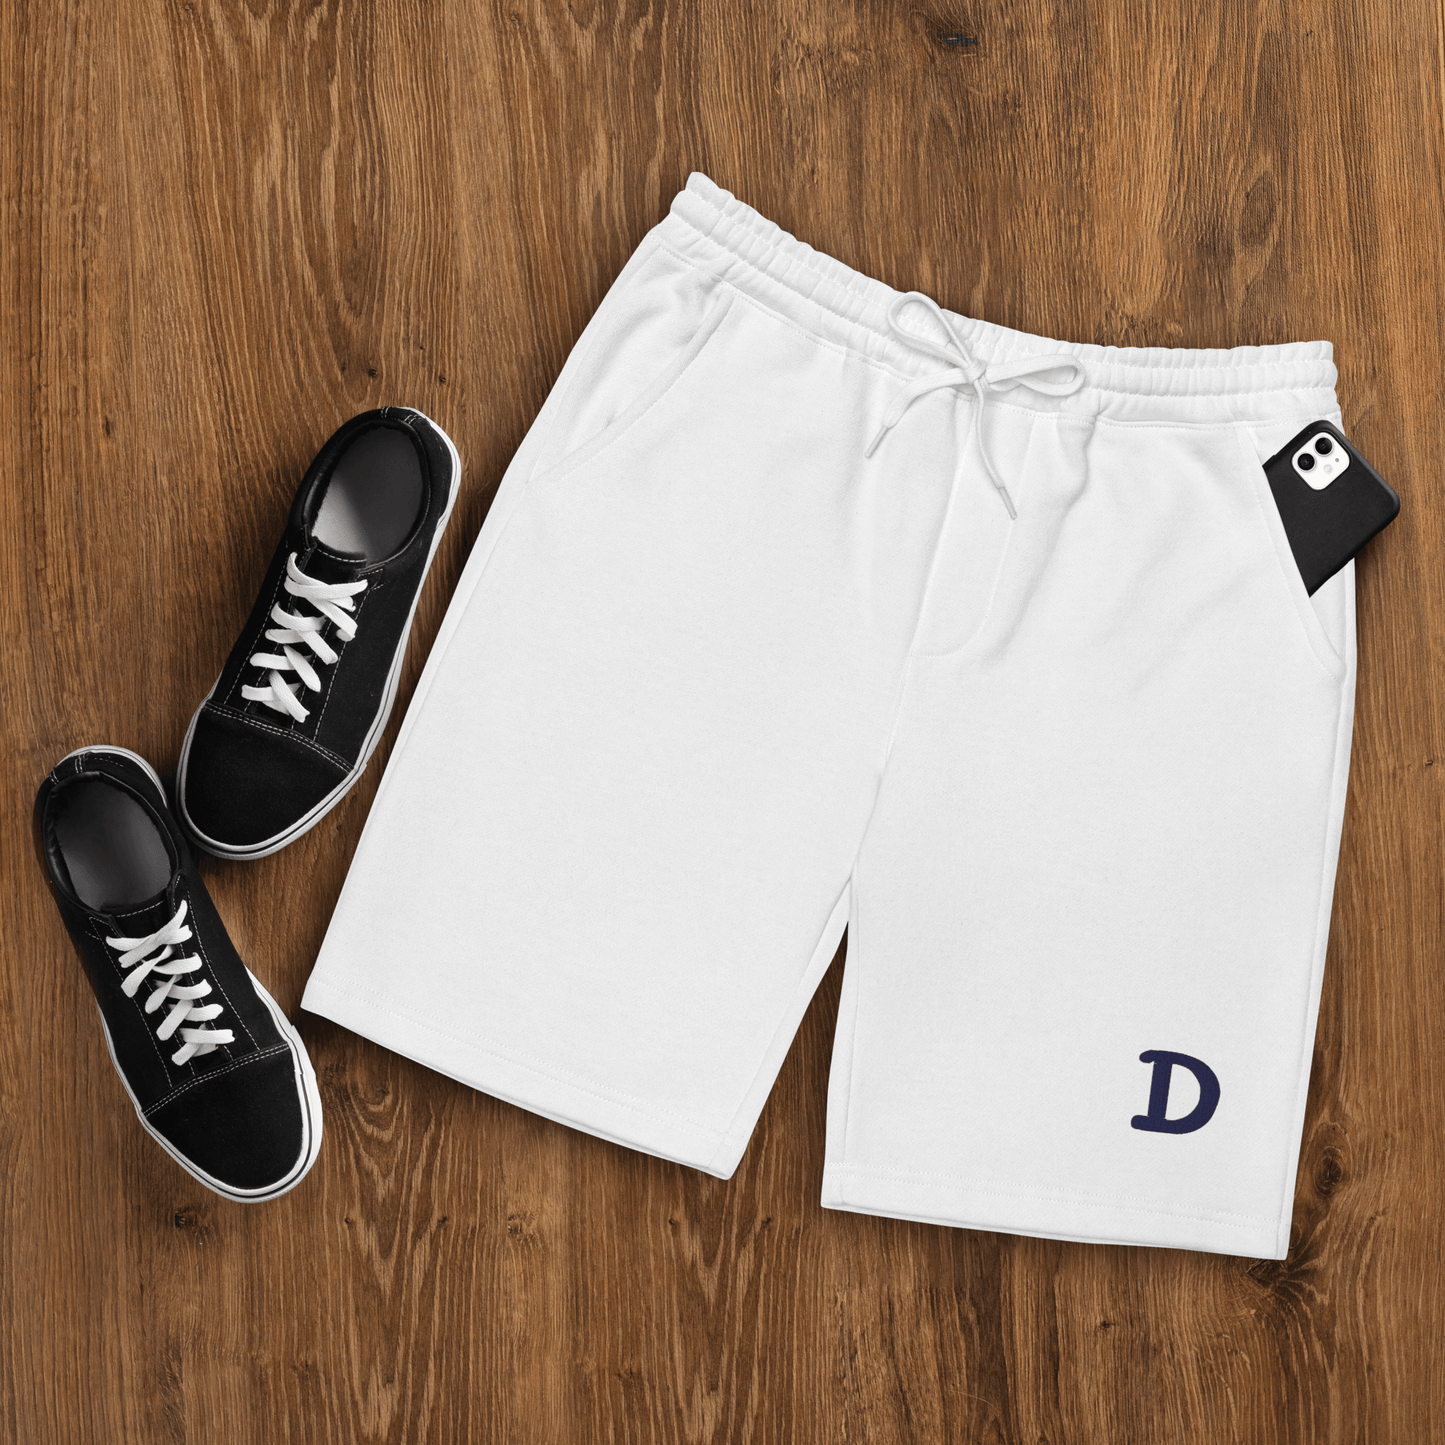 Detroit 'Old French D' Men's Shorts | Embroidered Fleece - Circumspice Michigan